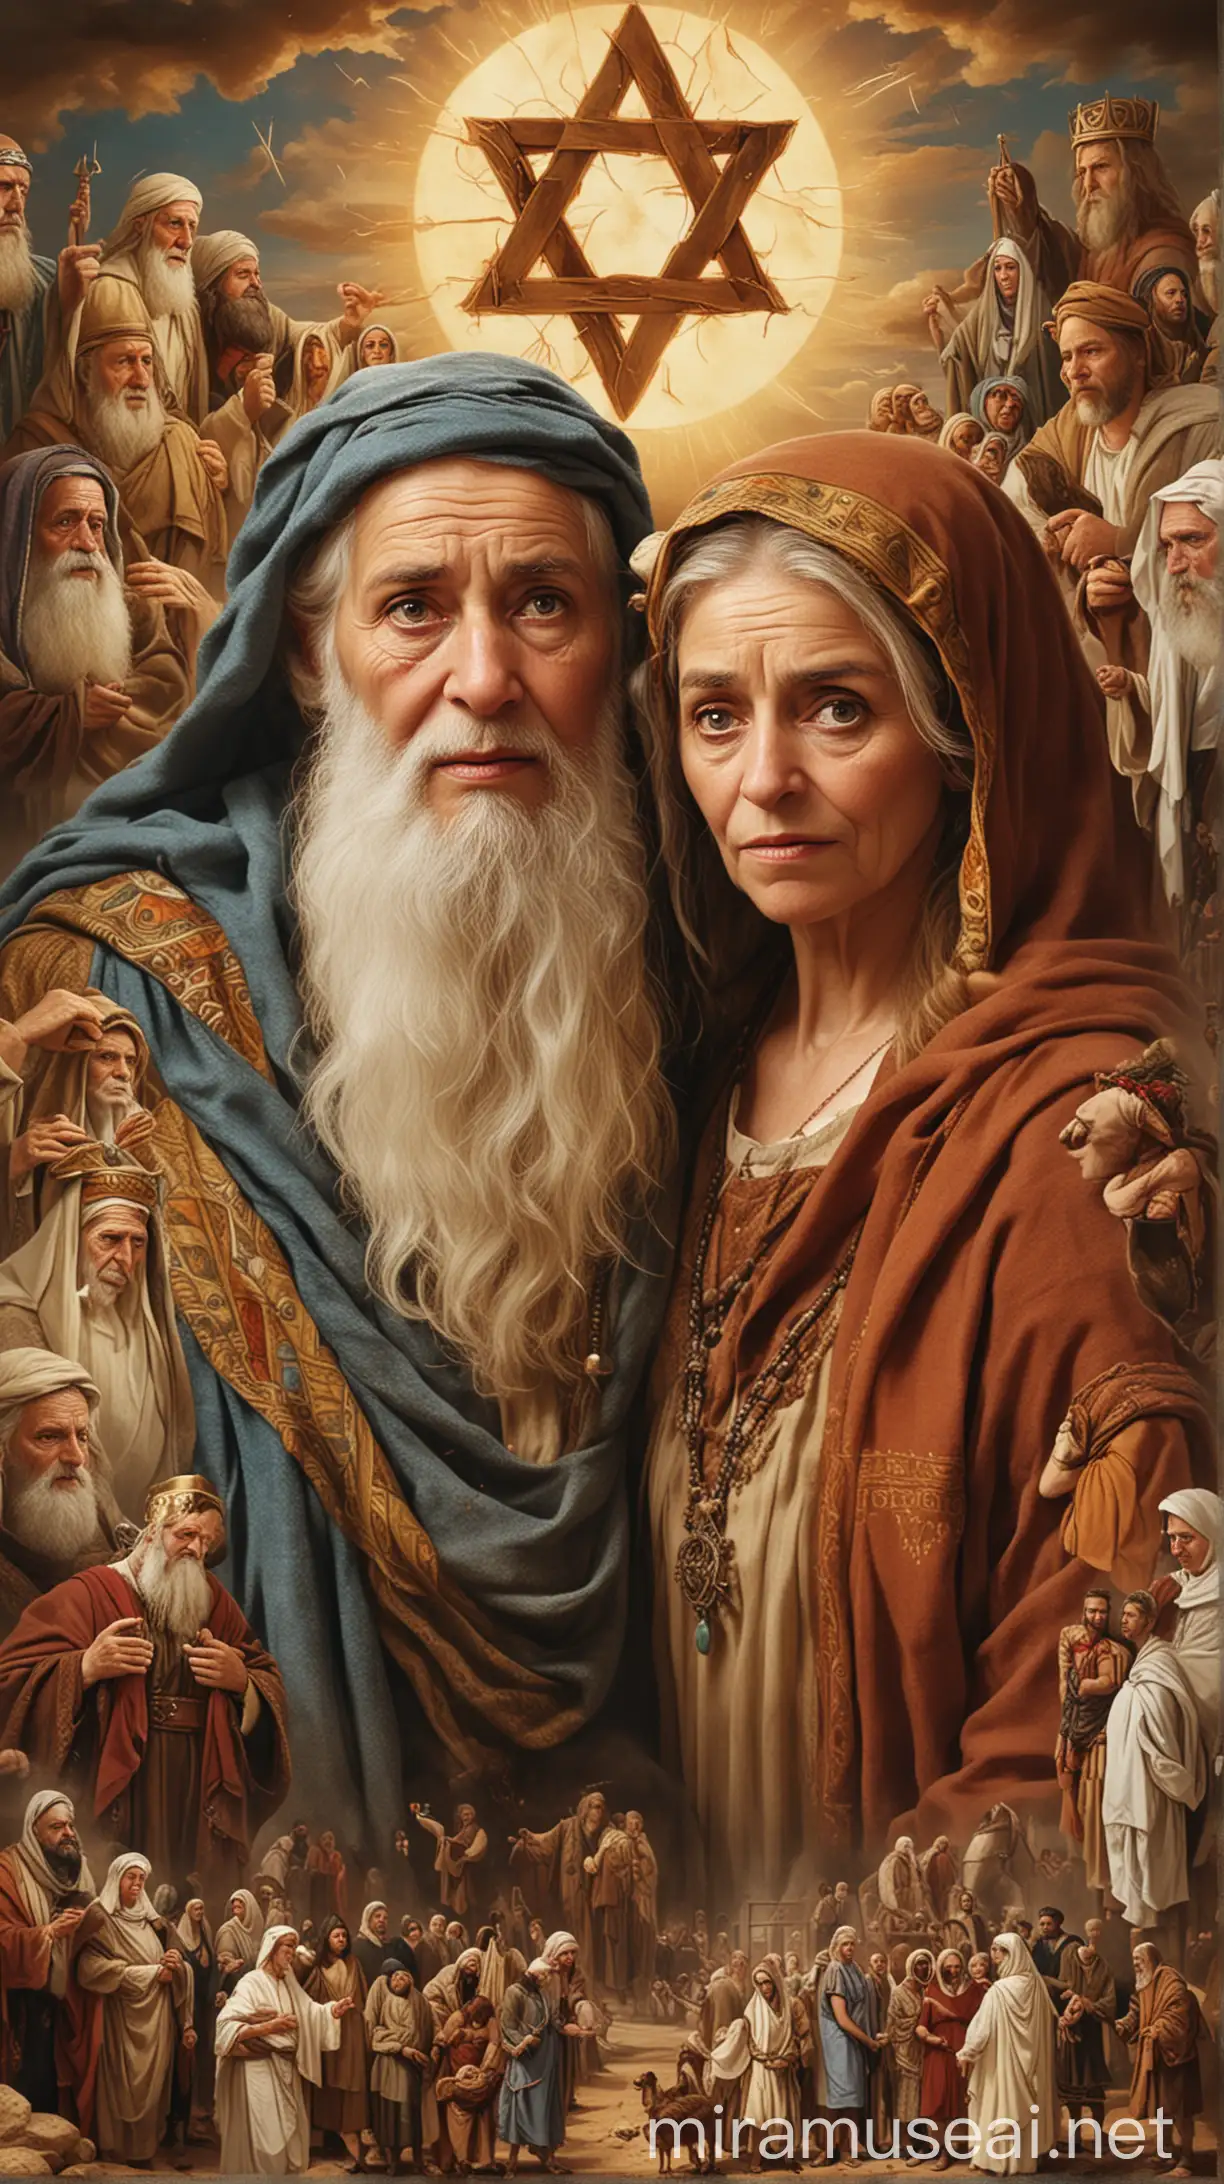 Generate an image depicting Isaac and Rebekah old Jewish parent surrounded by symbolic representations of bitterness, reflecting the challenges they faced due to Esau's choices.